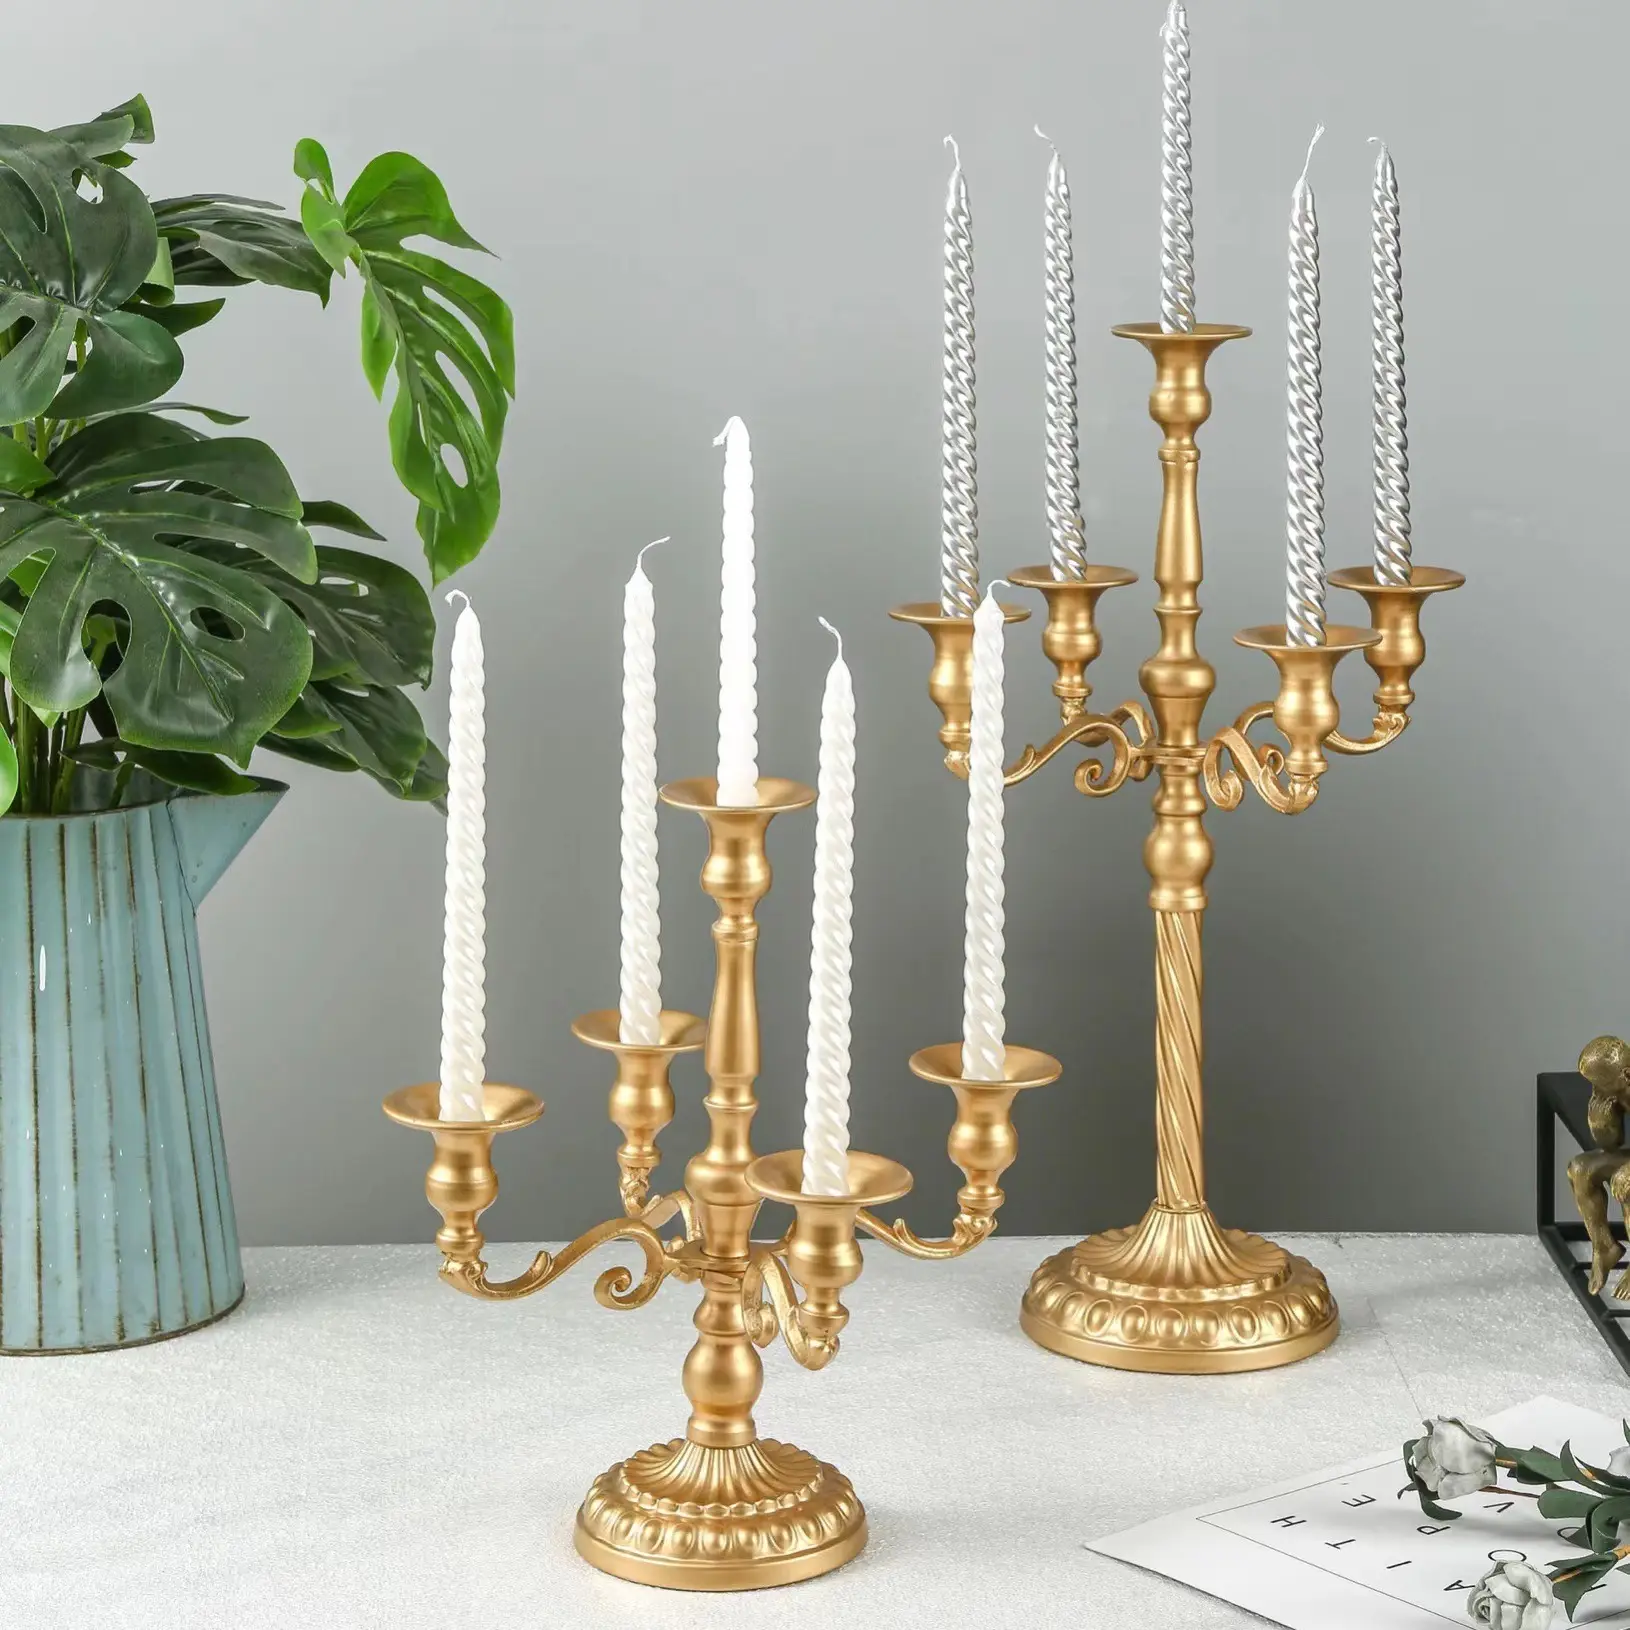 Handmade Tall 5 Arm Gold Metal Candelabra For Wedding Home Decor Table Candle Holders Centerpiece